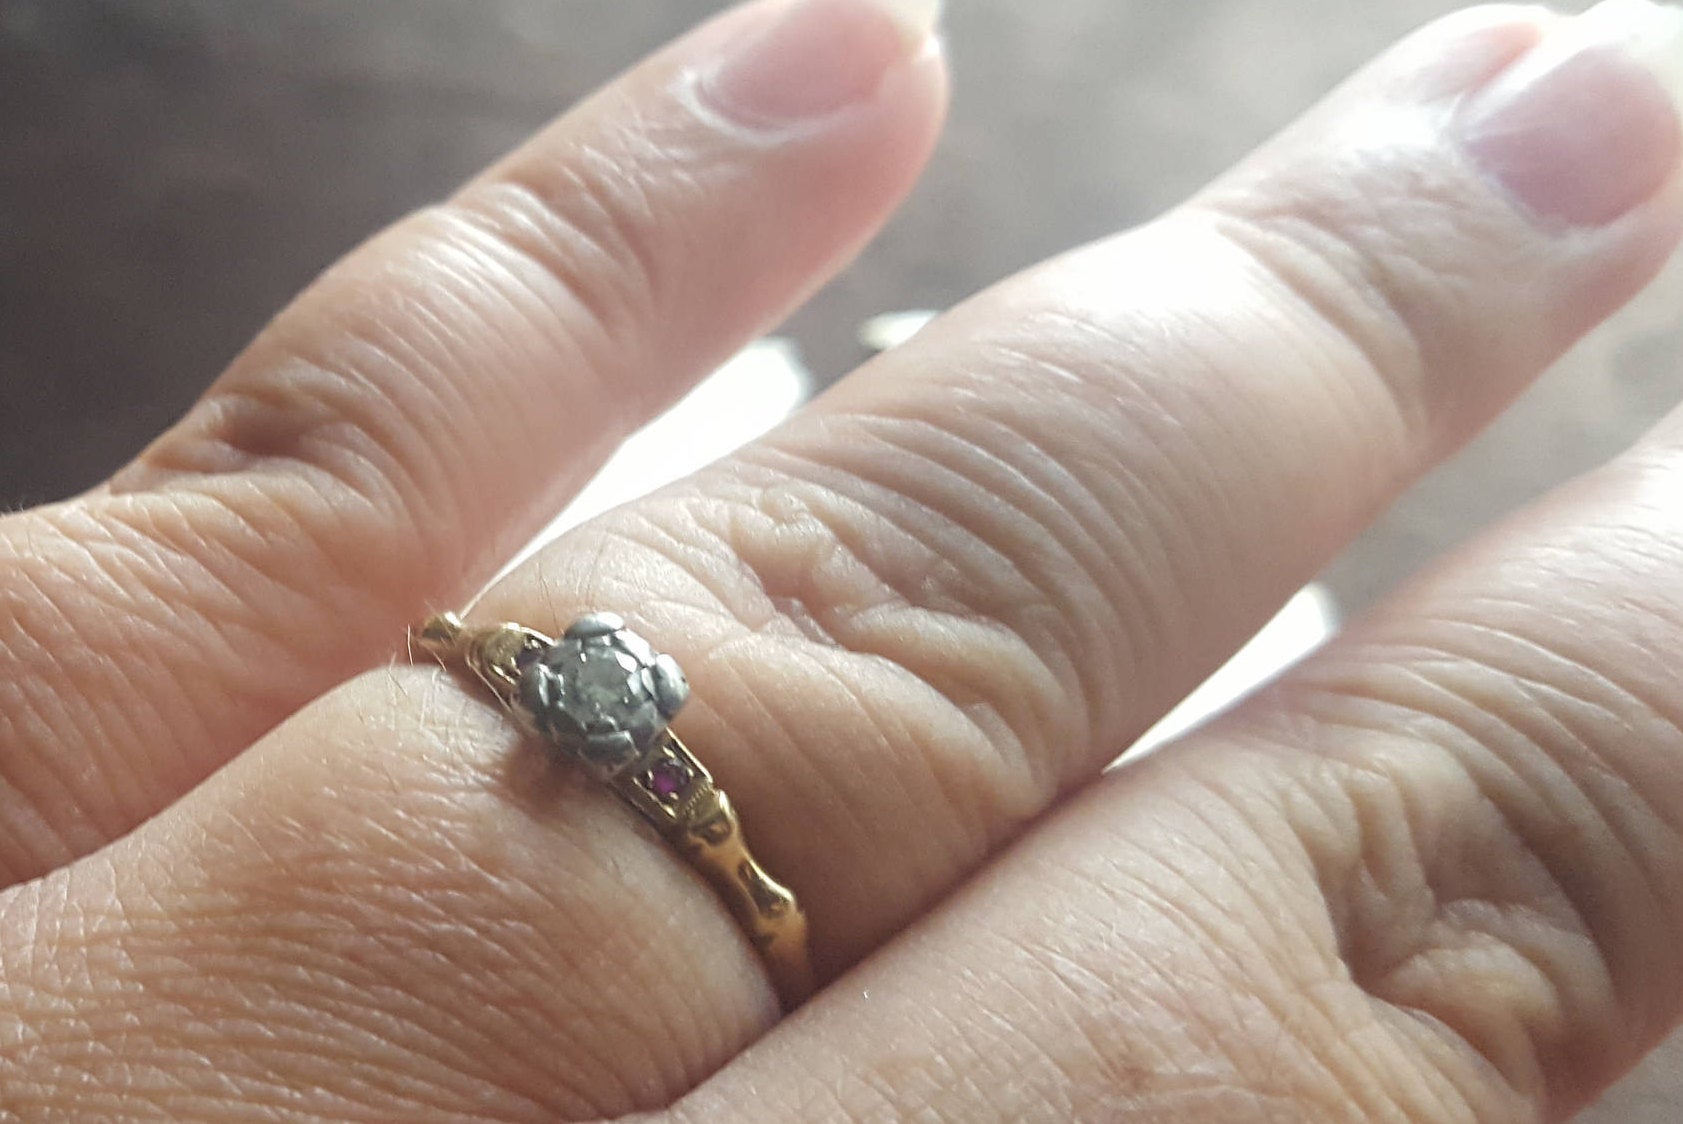 Woman Defends Her Modest Engagement Ring & Goes Viral - InspireMore